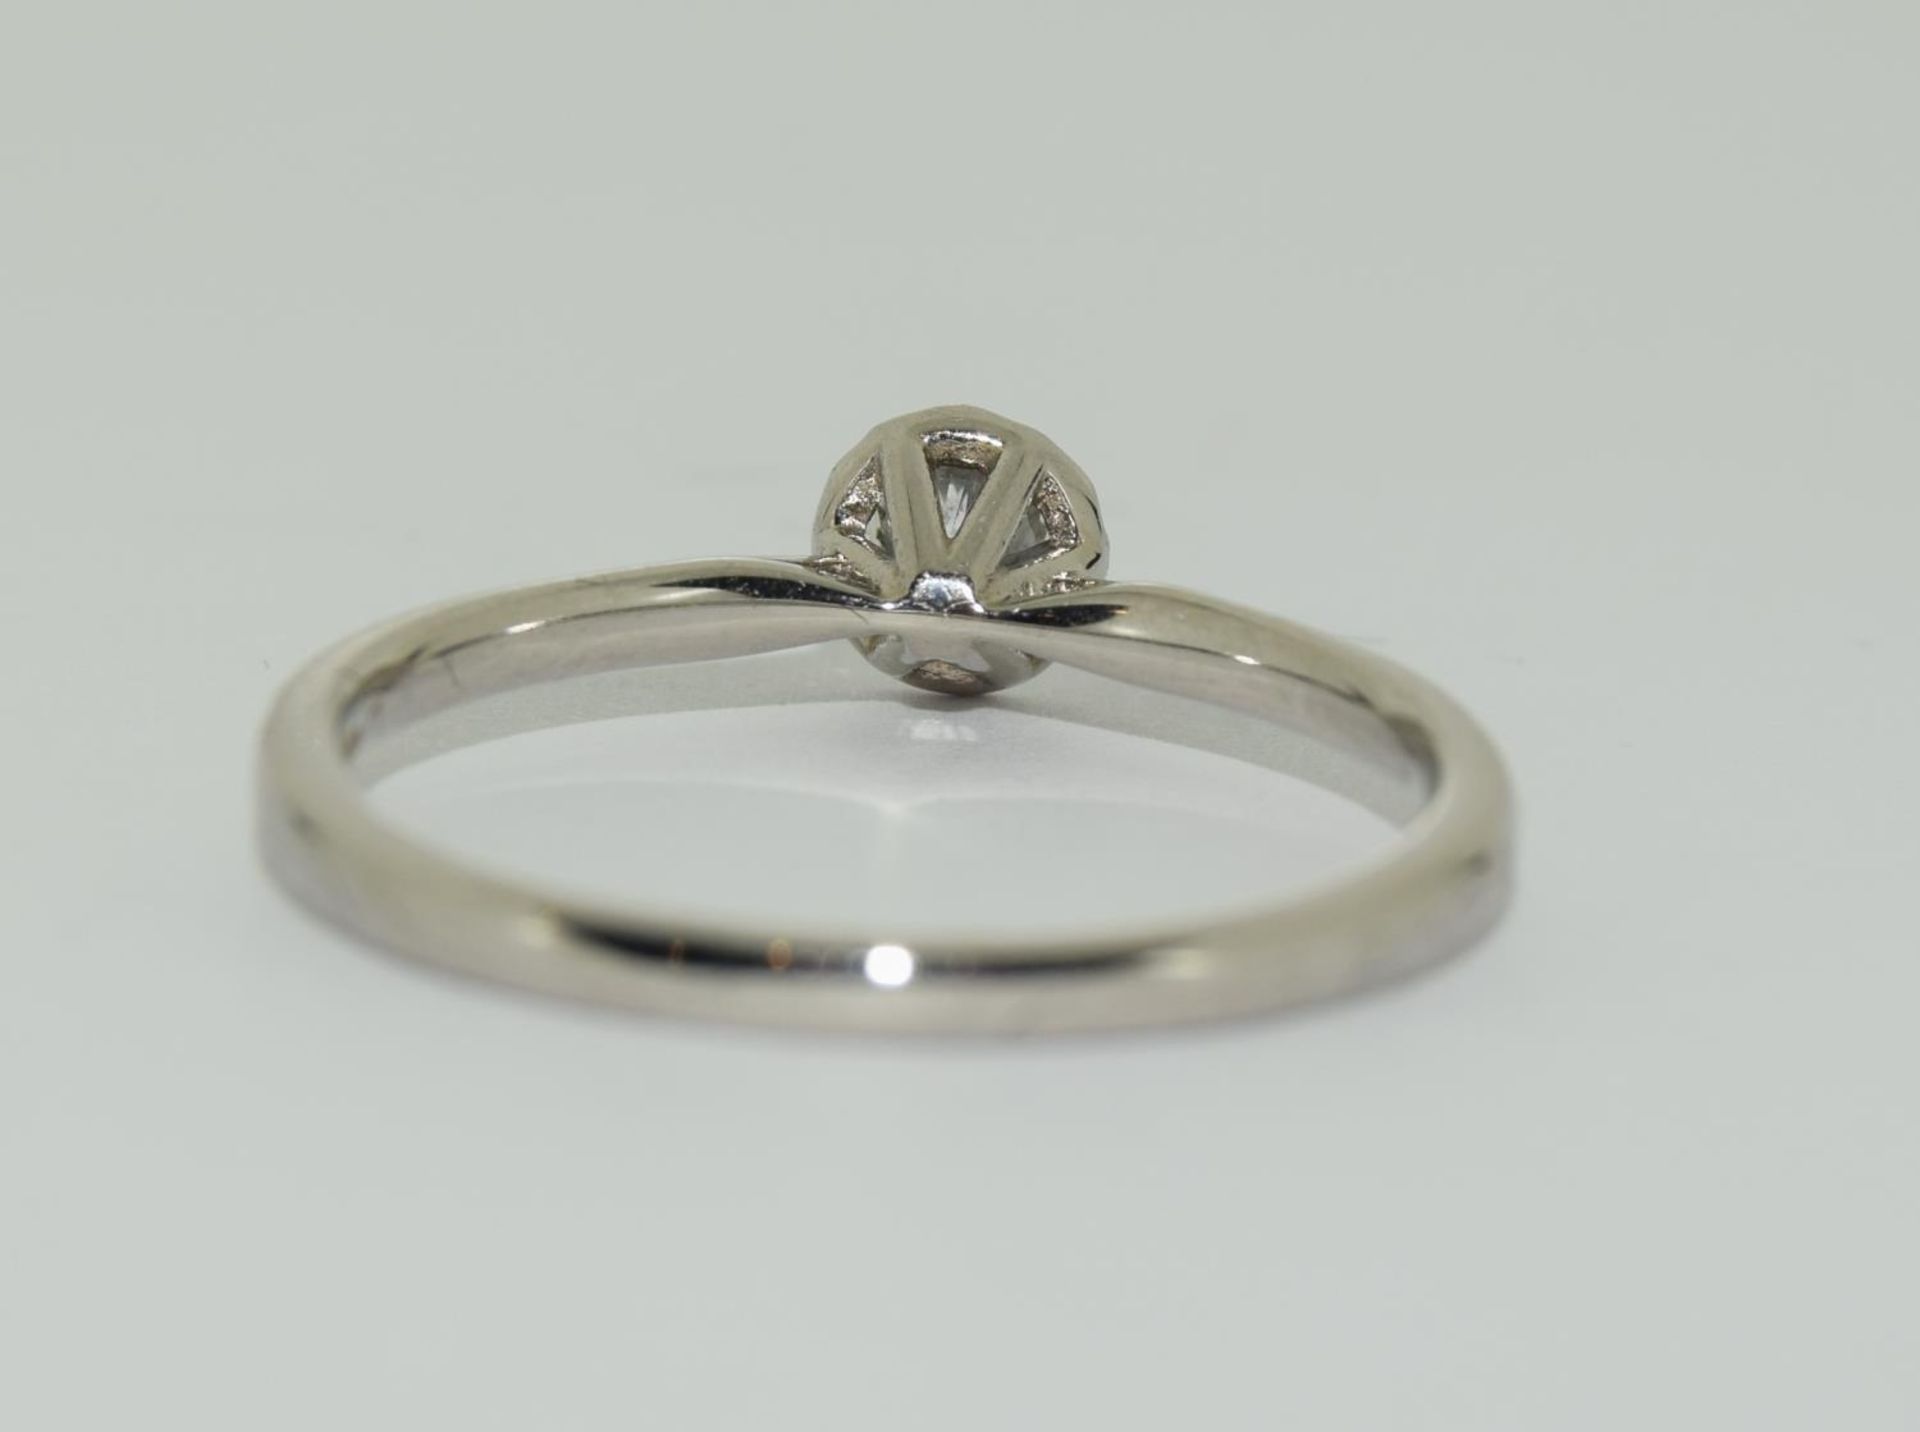 Palladium solitaire ring featuring brilliant round cut diamond in an illusion setting total - Image 3 of 5